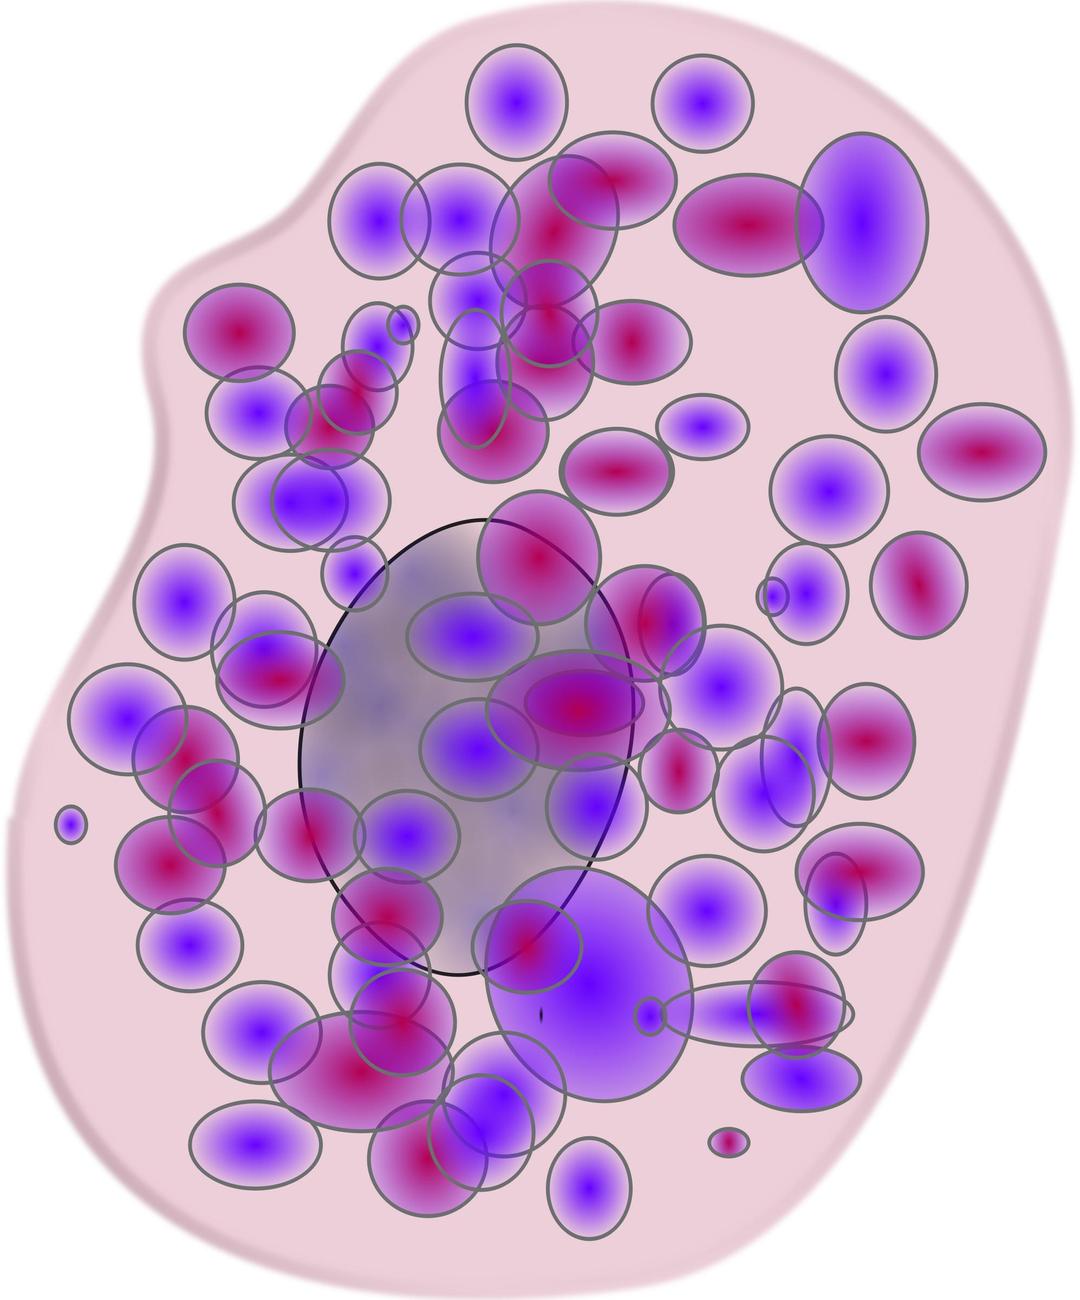 mast-cell png transparent